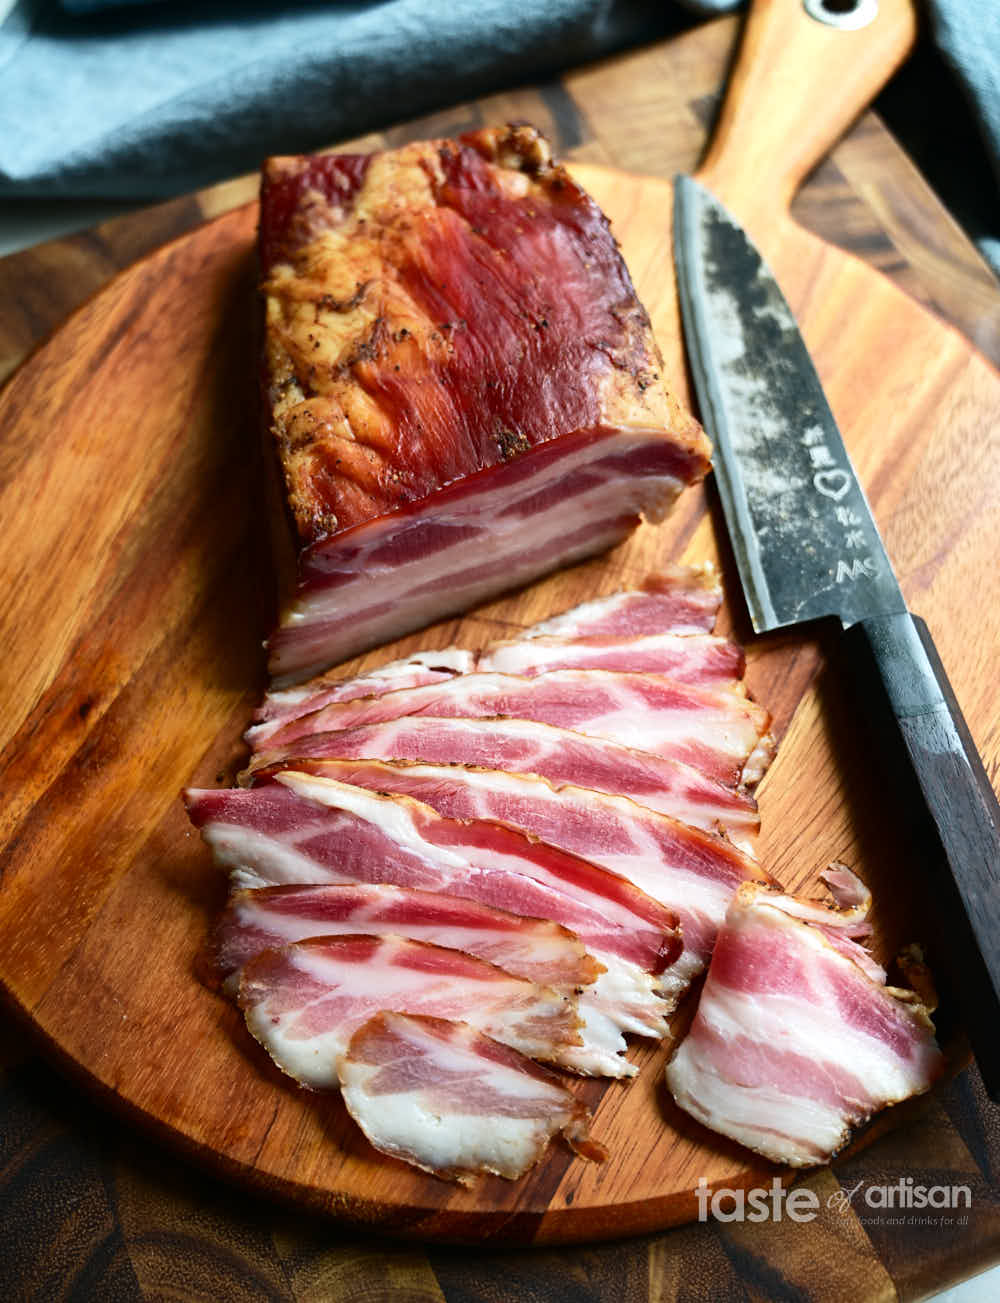 Sliced to eat smoked bacon cured with maple syrup and a touch of cayenne pepper.